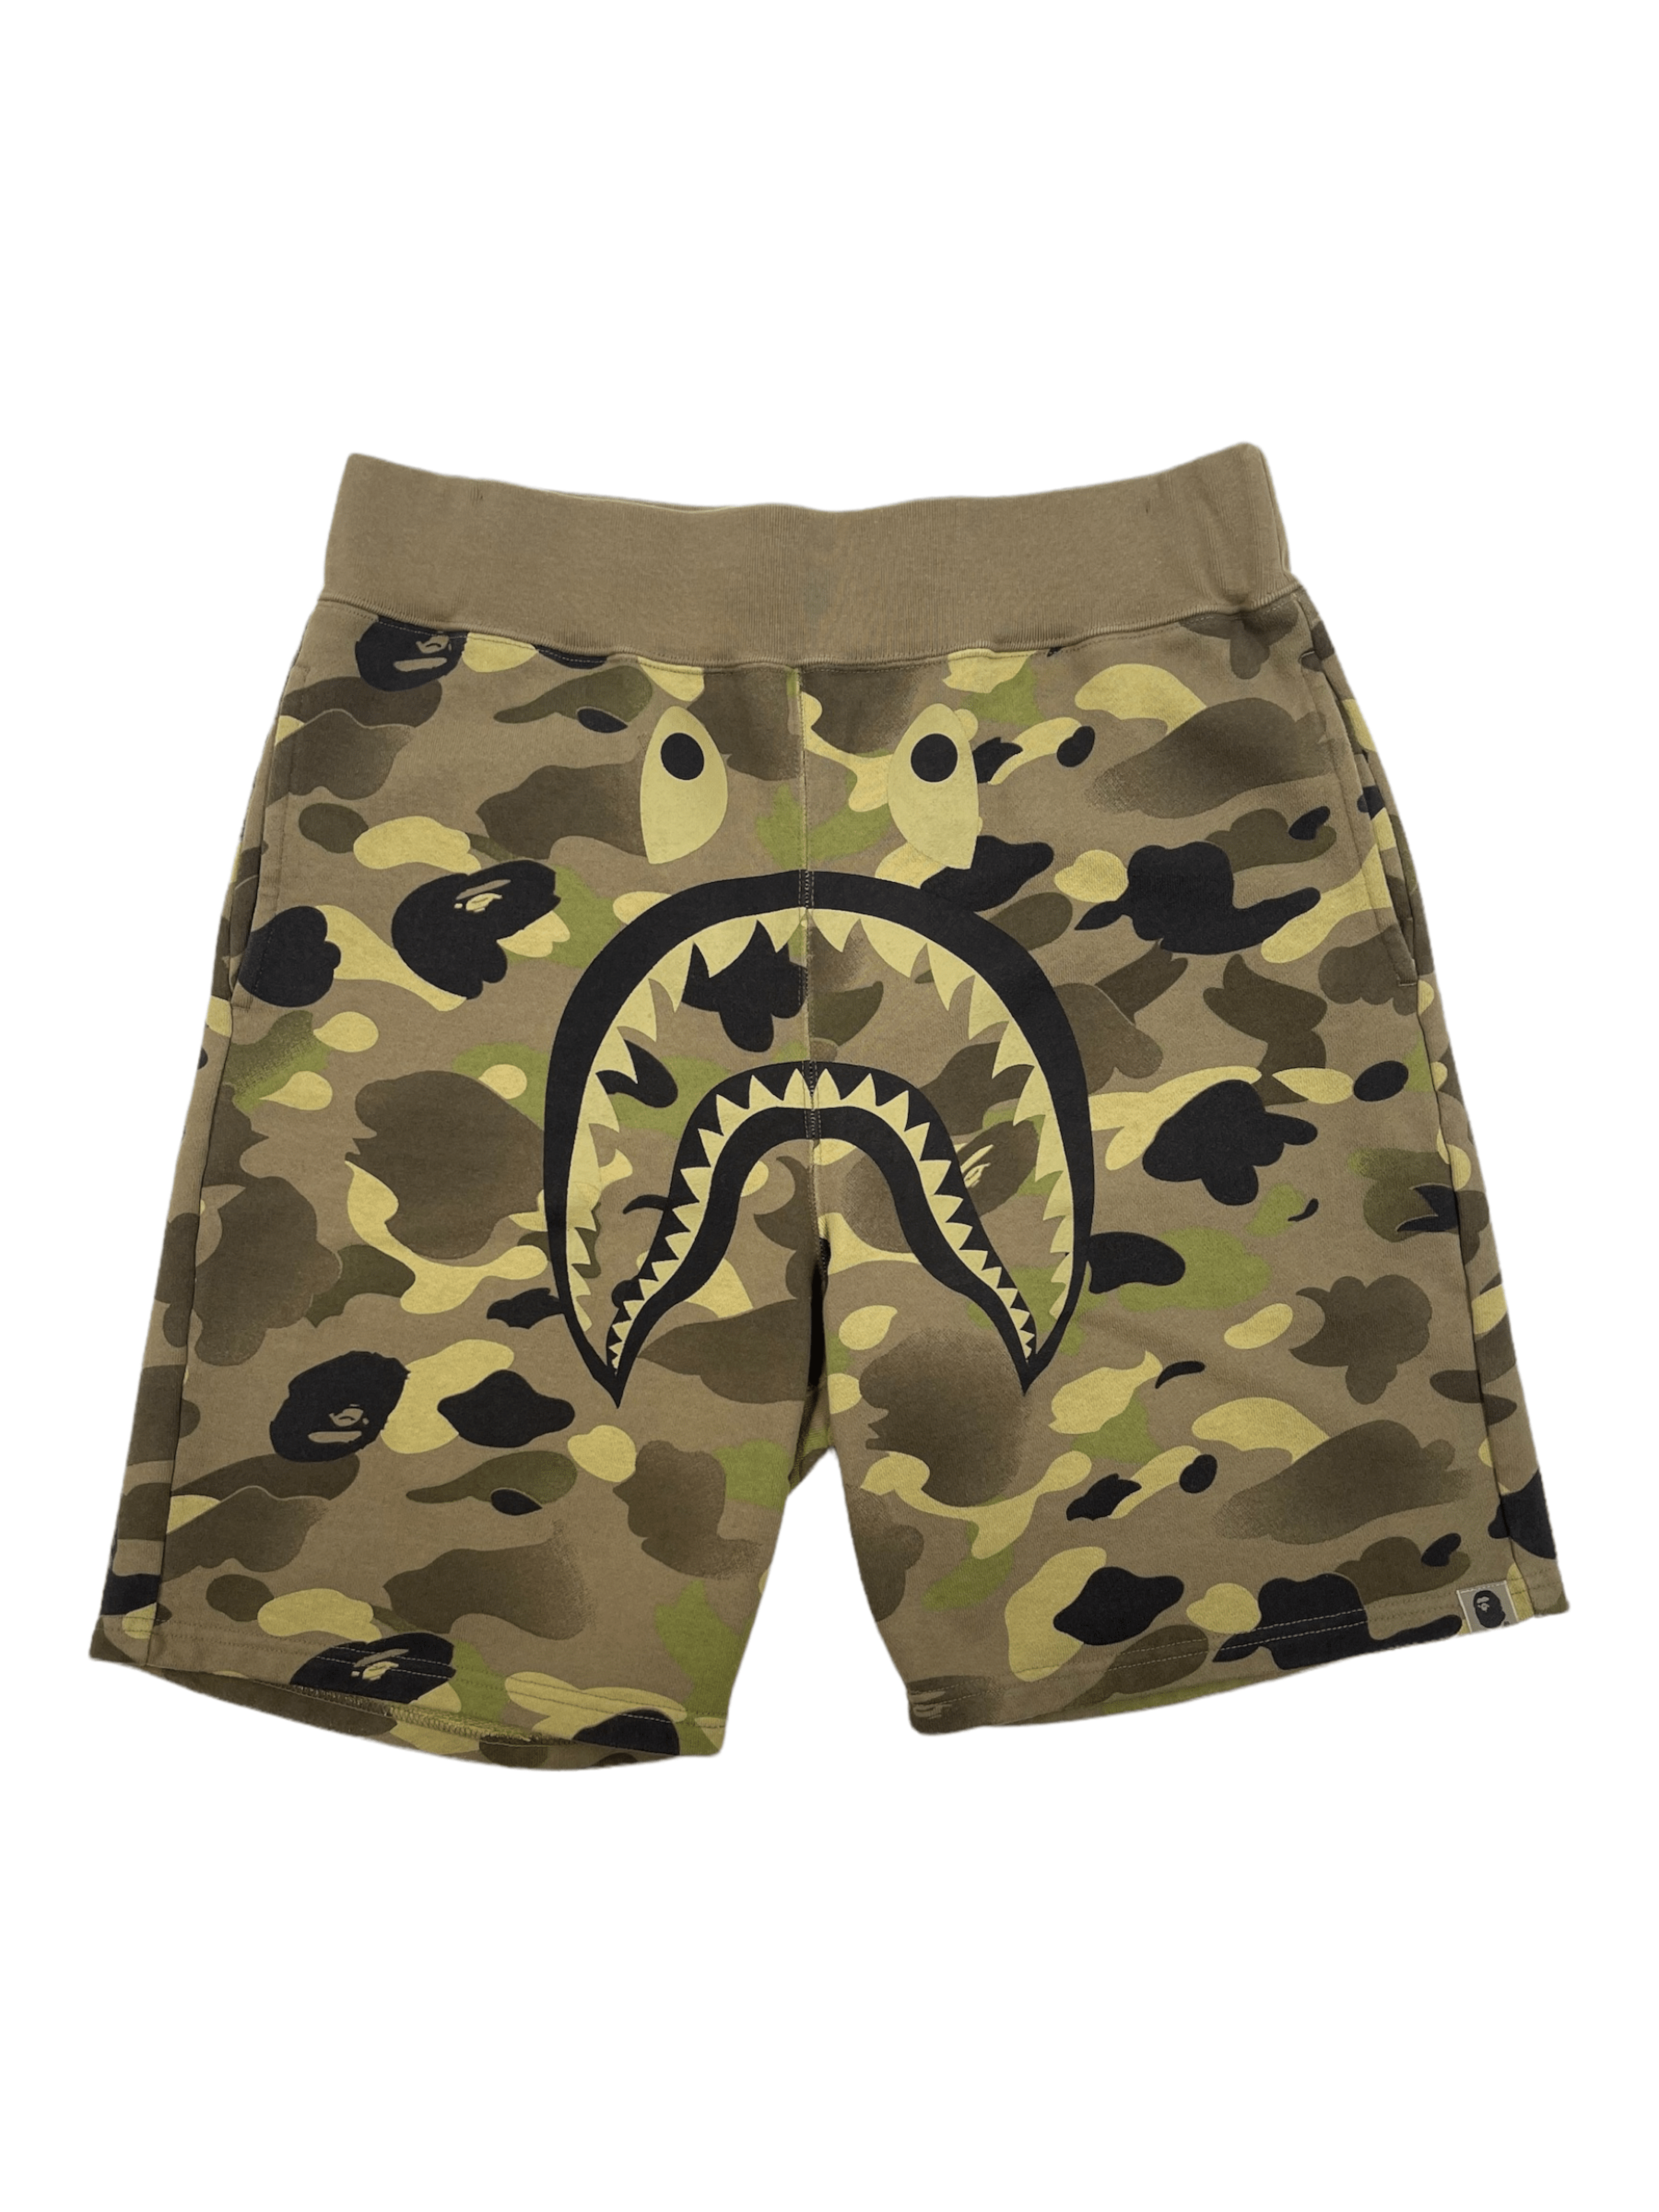 BAPE x Undefeated Shark Sweat Shorts Camo Green Pre-Owned